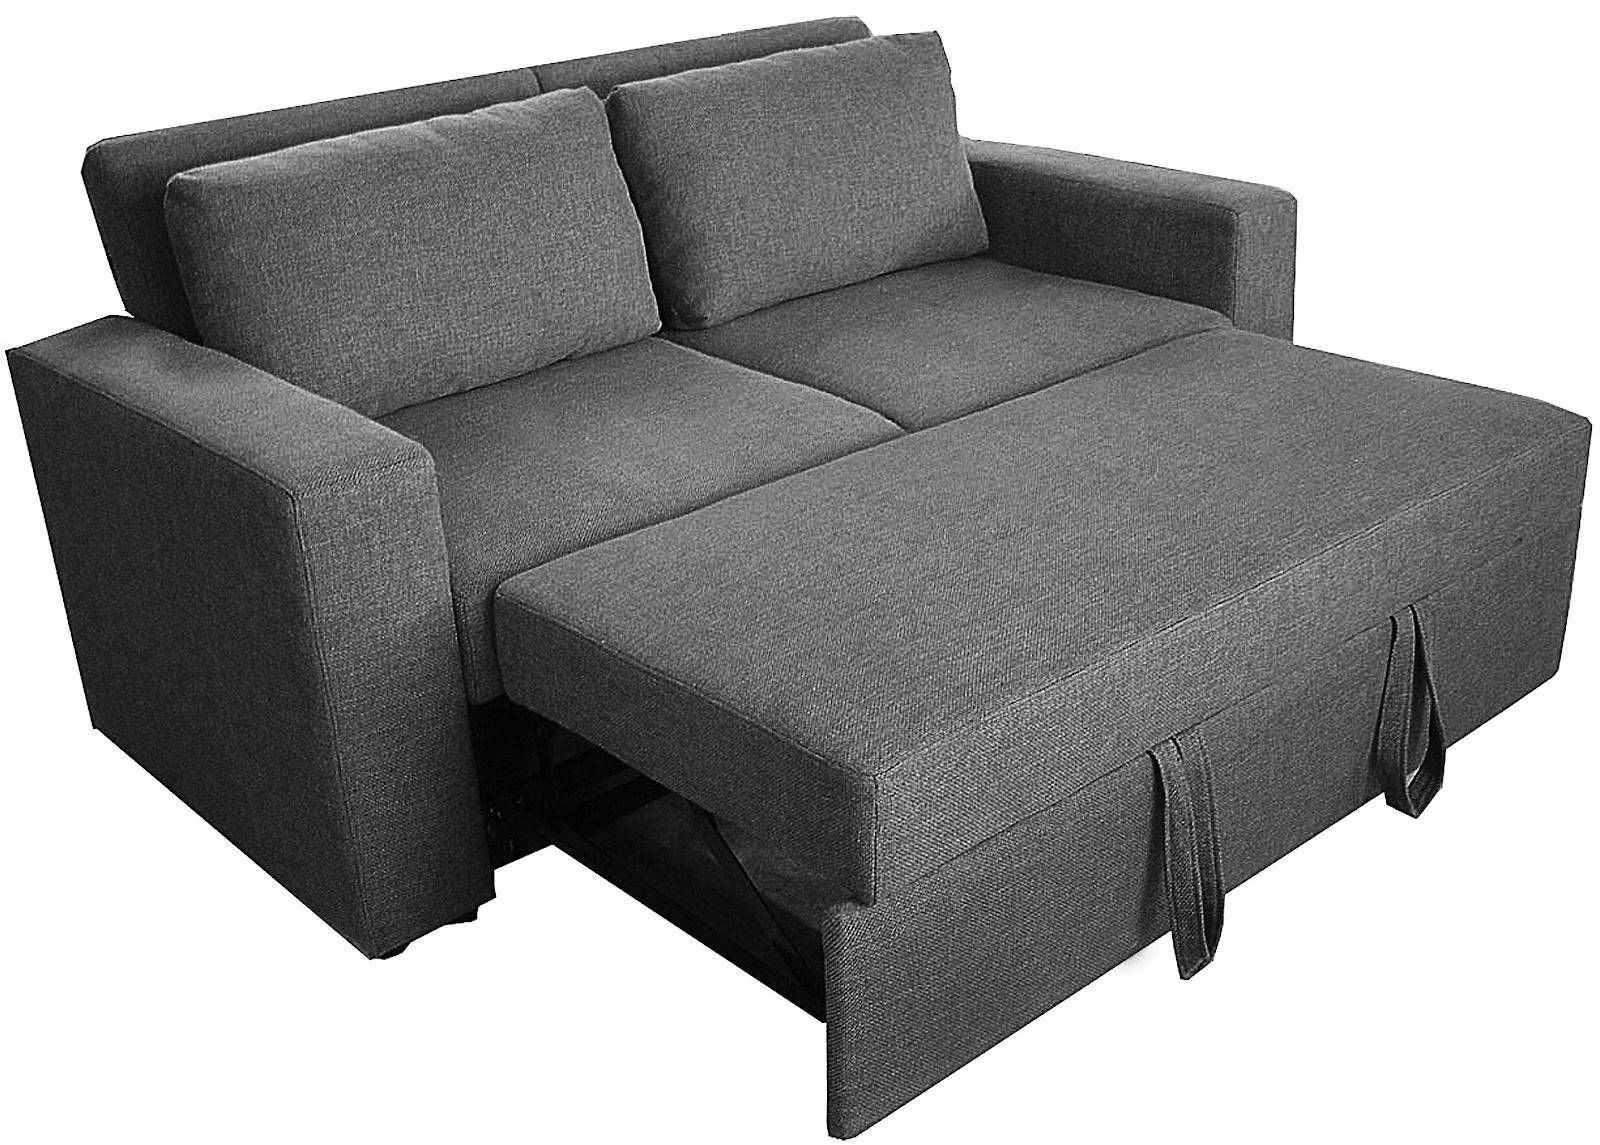 Sofas: Comfortable Simmons Sleeper Sofa For Cozy Sofas Design Intended For Simmons Chaise Sofa (View 19 of 25)